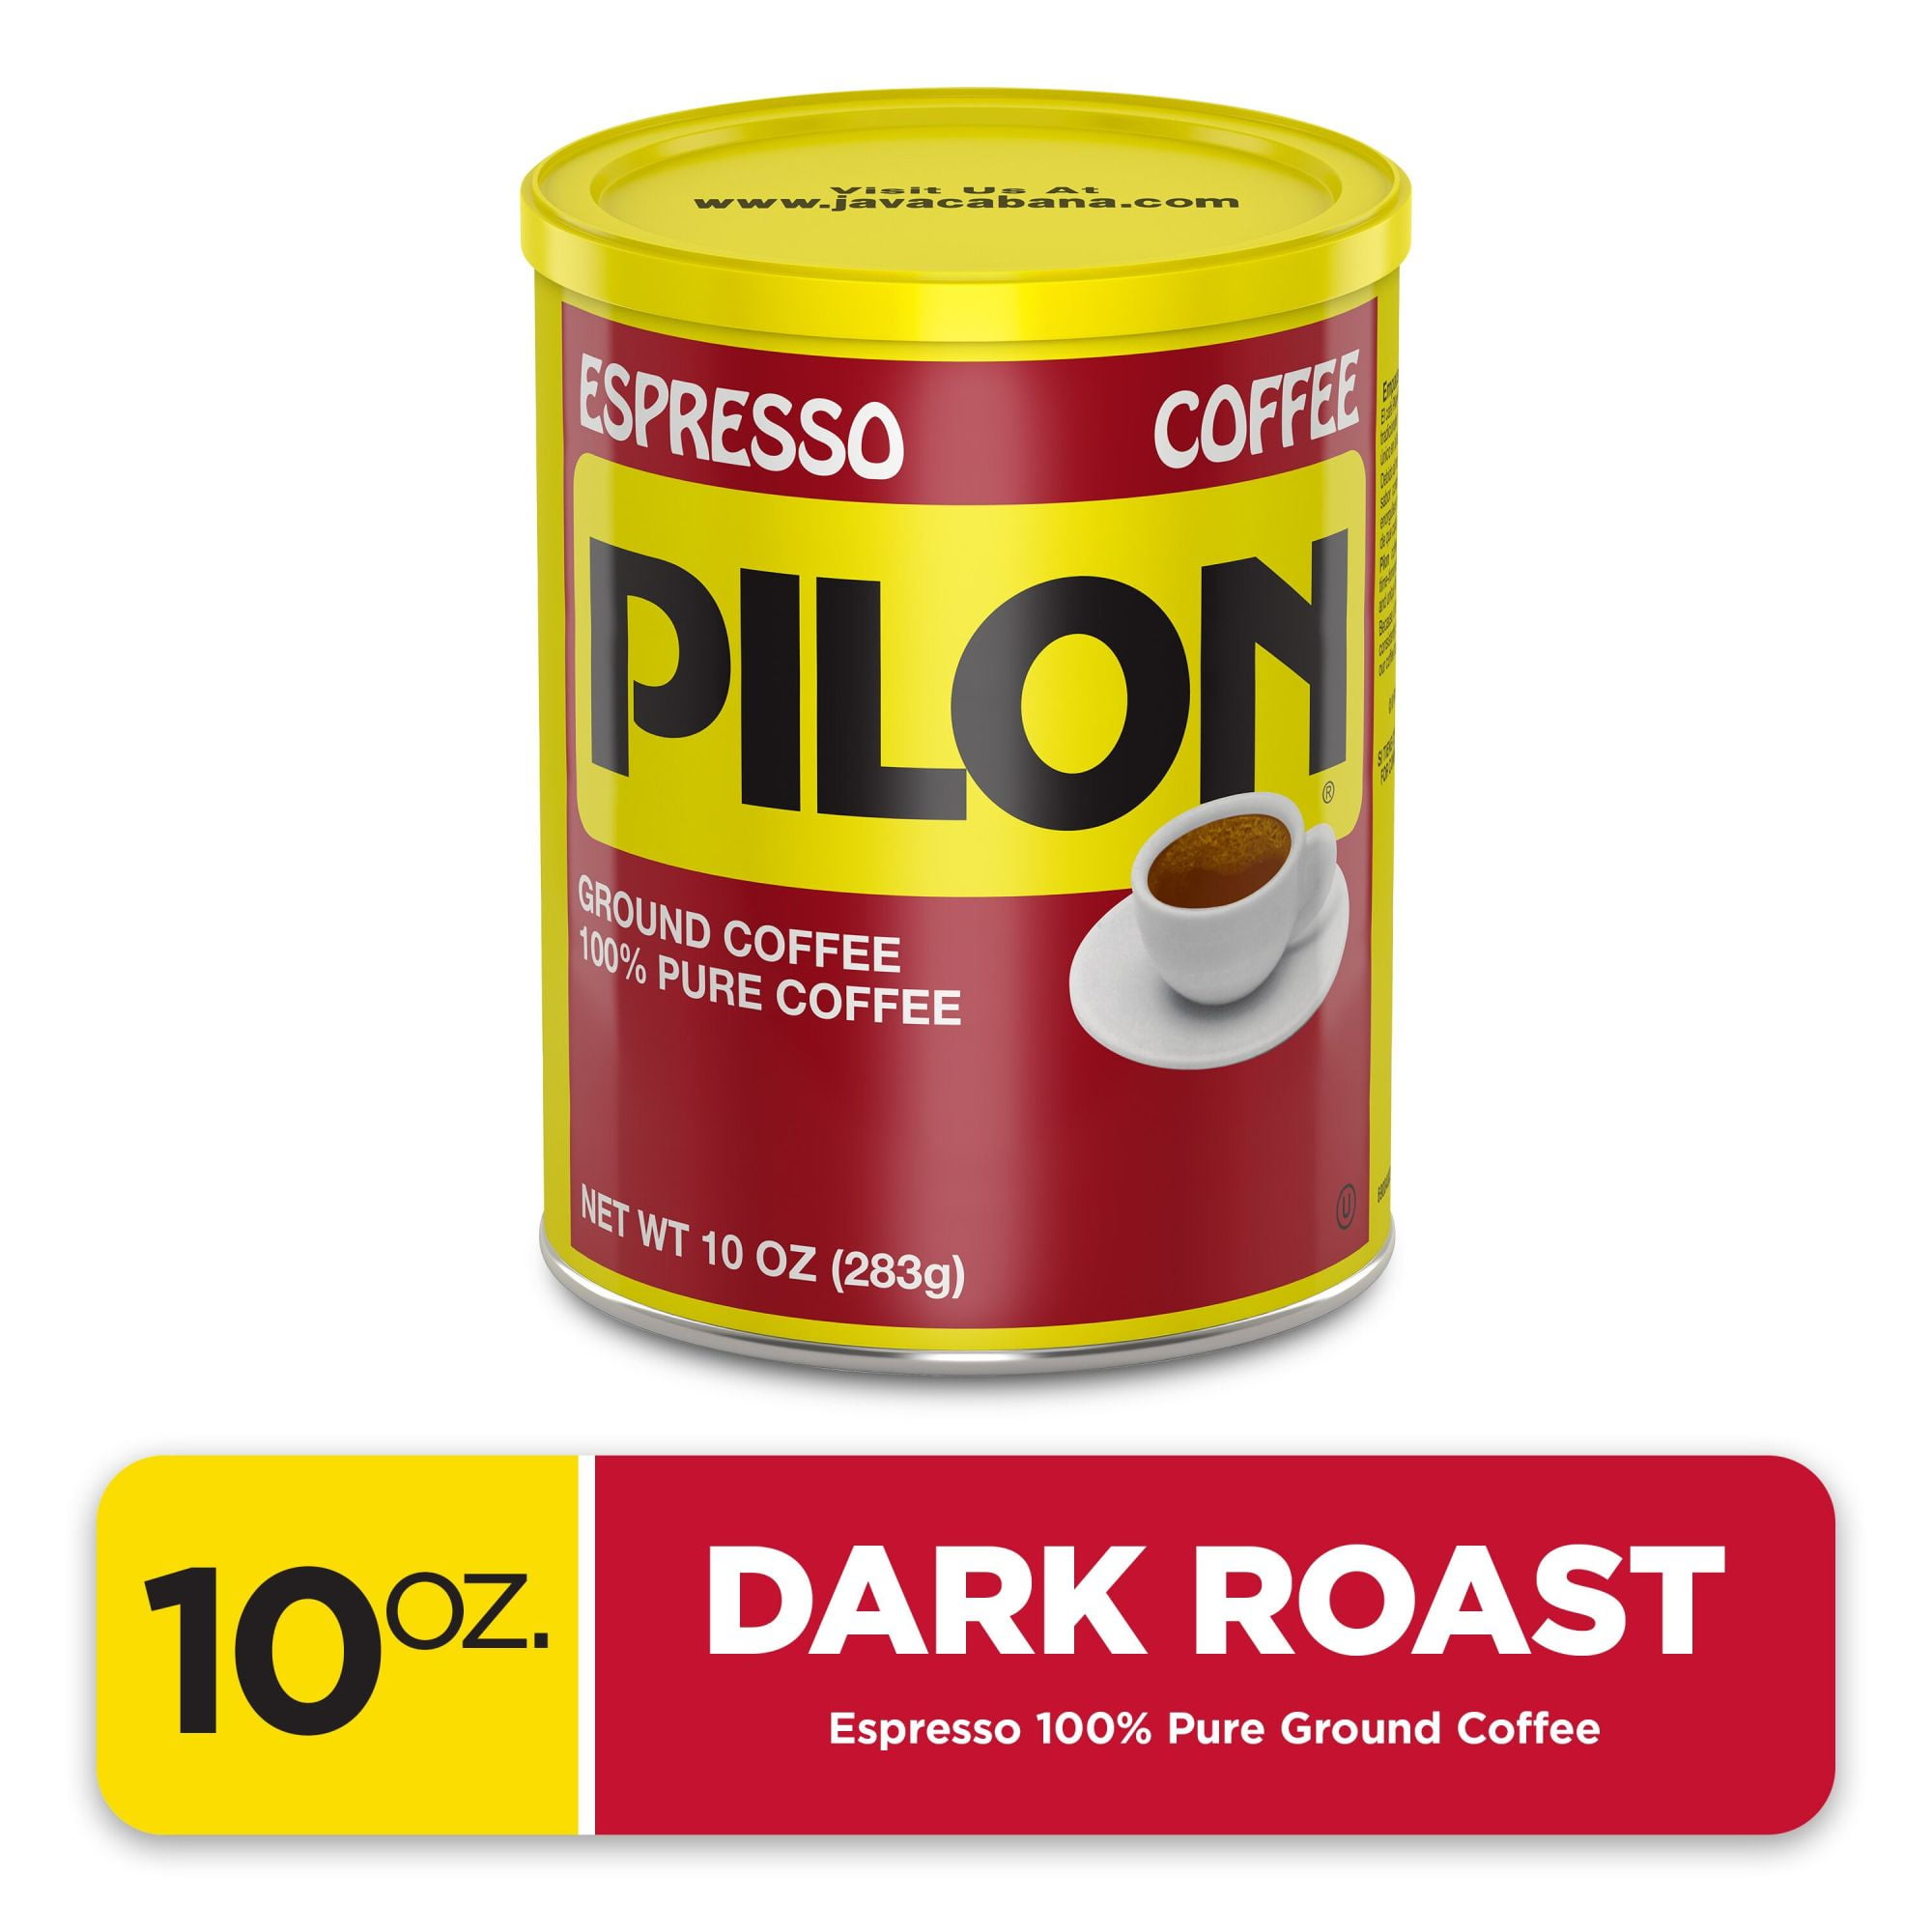  Pilon Espresso Coffee, 36 Ounce (Pack of 6) : Ground Coffee :  Grocery & Gourmet Food